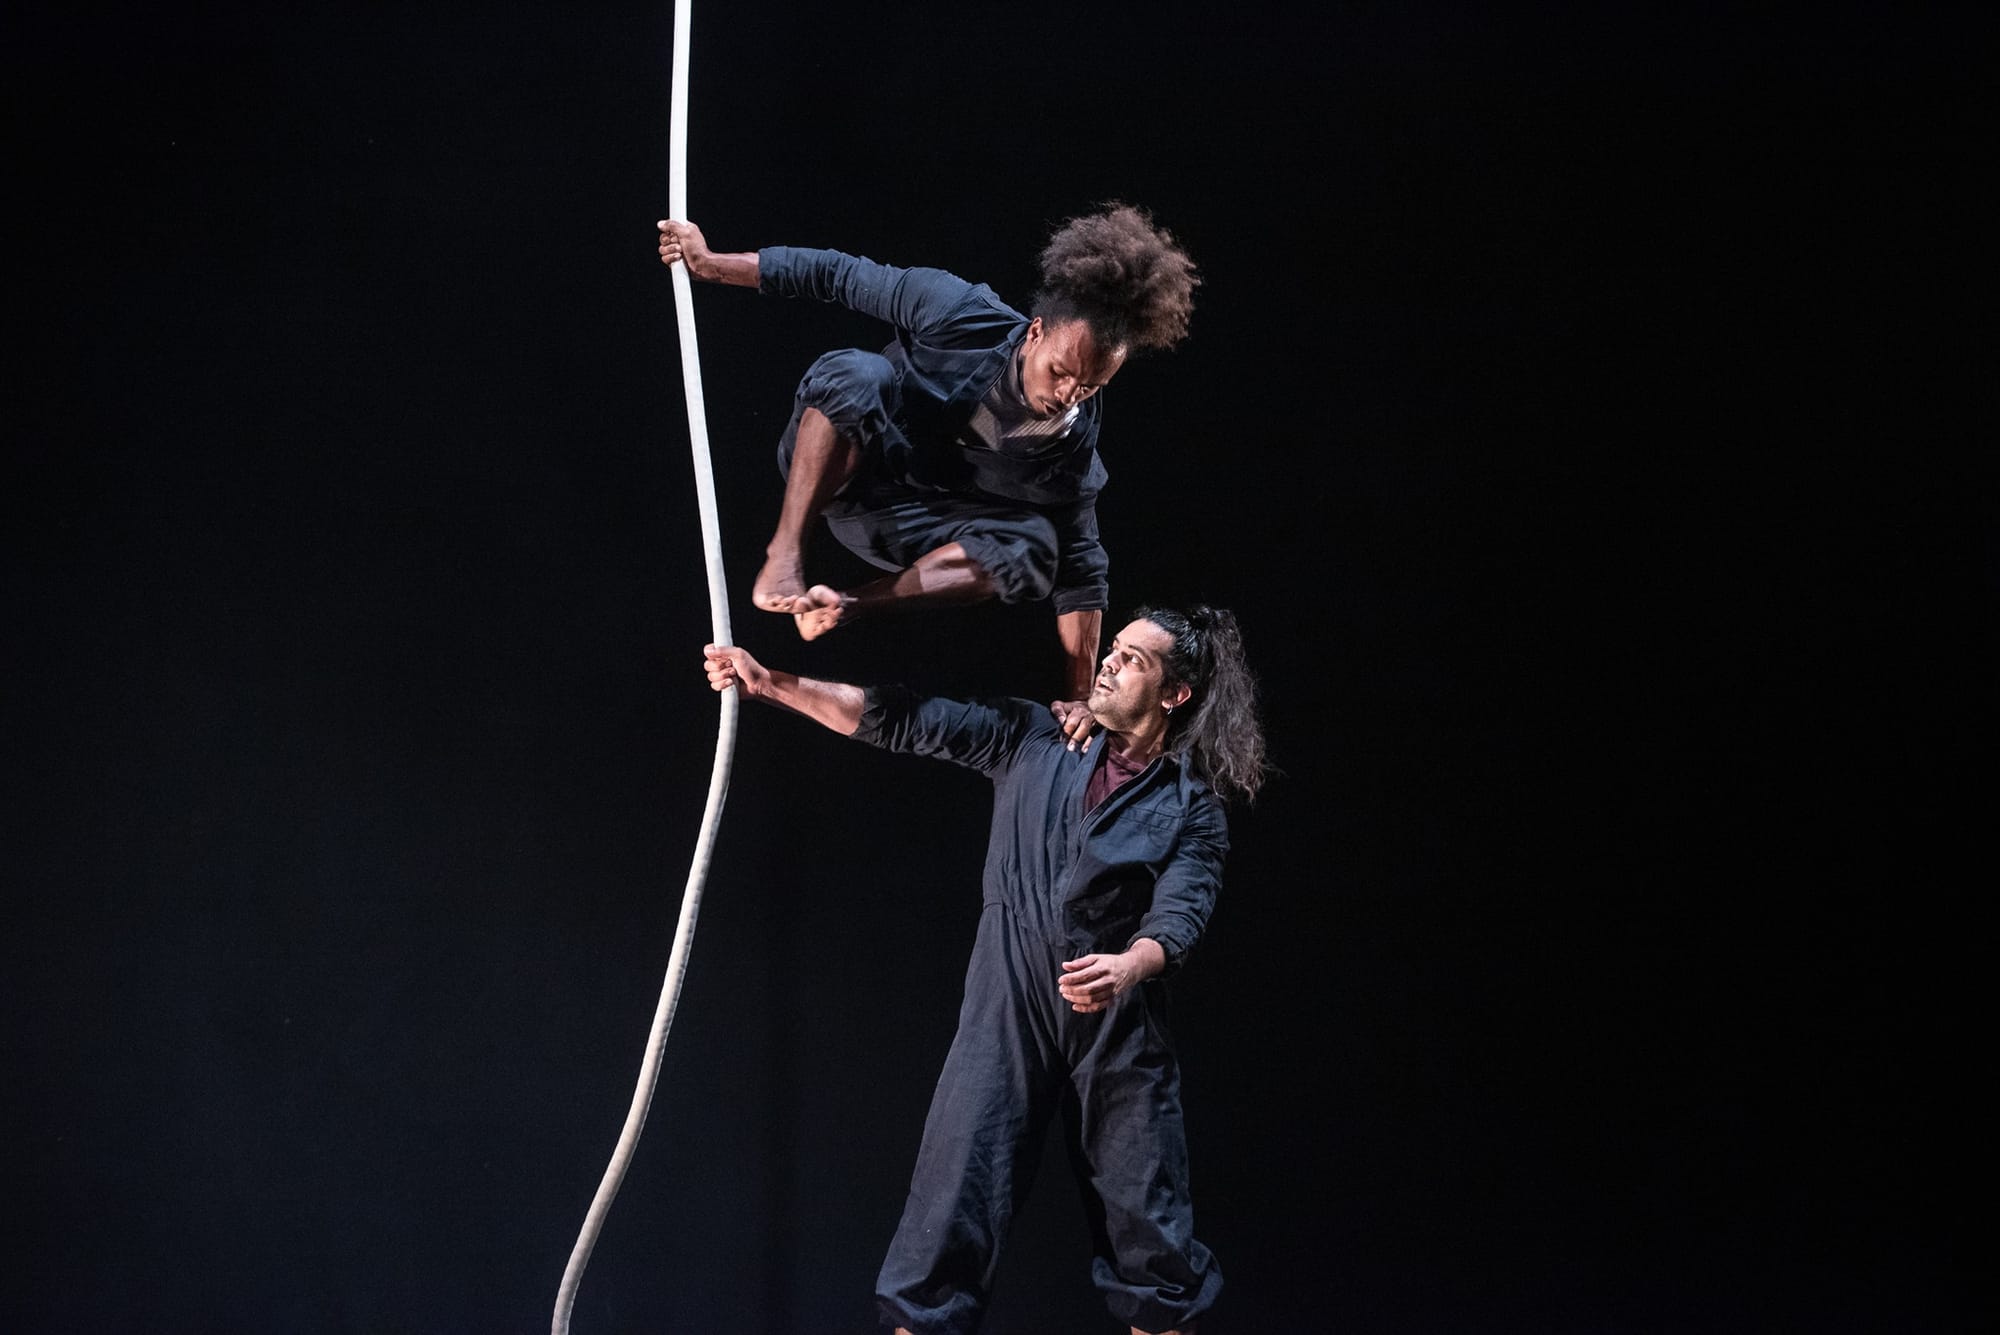 Cia Doisacordes. An aerial rope vocabulary for intimacy